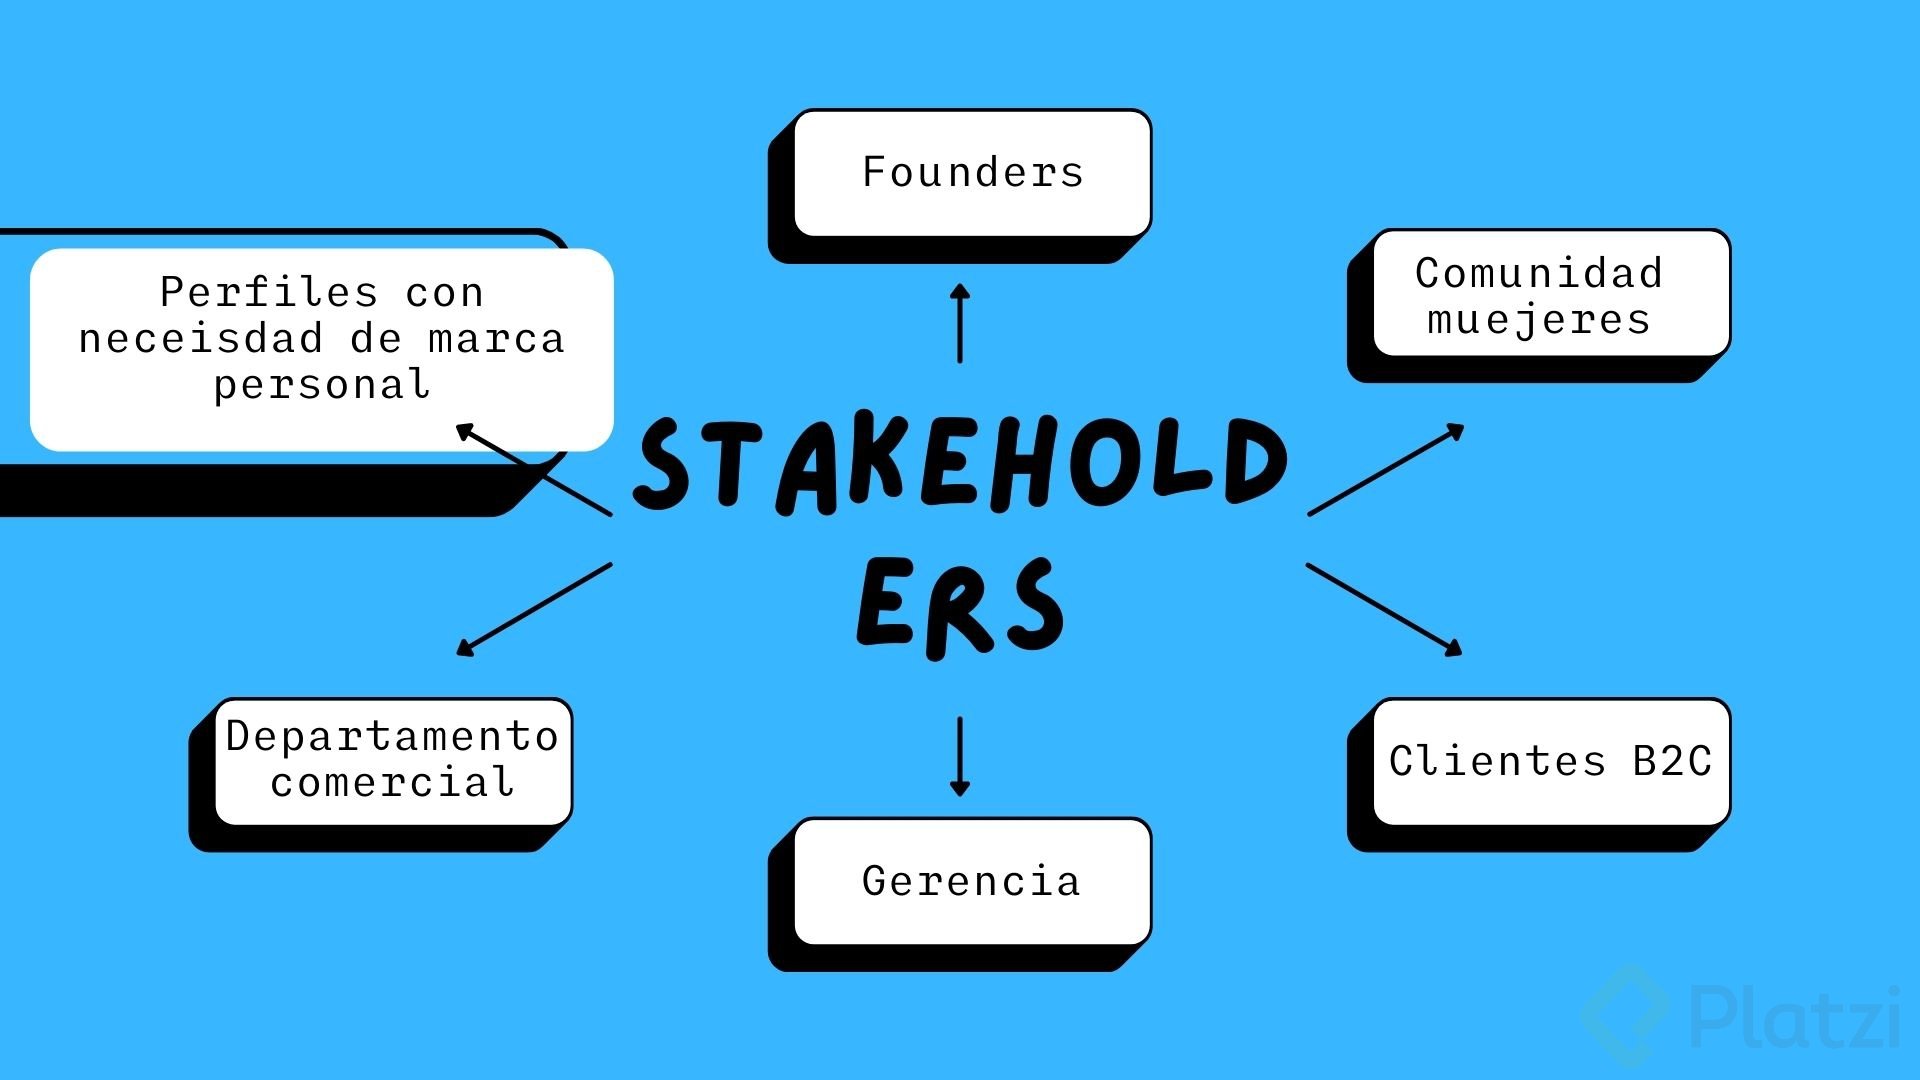 Stakeholders WIM CONF ejercicio.jpg